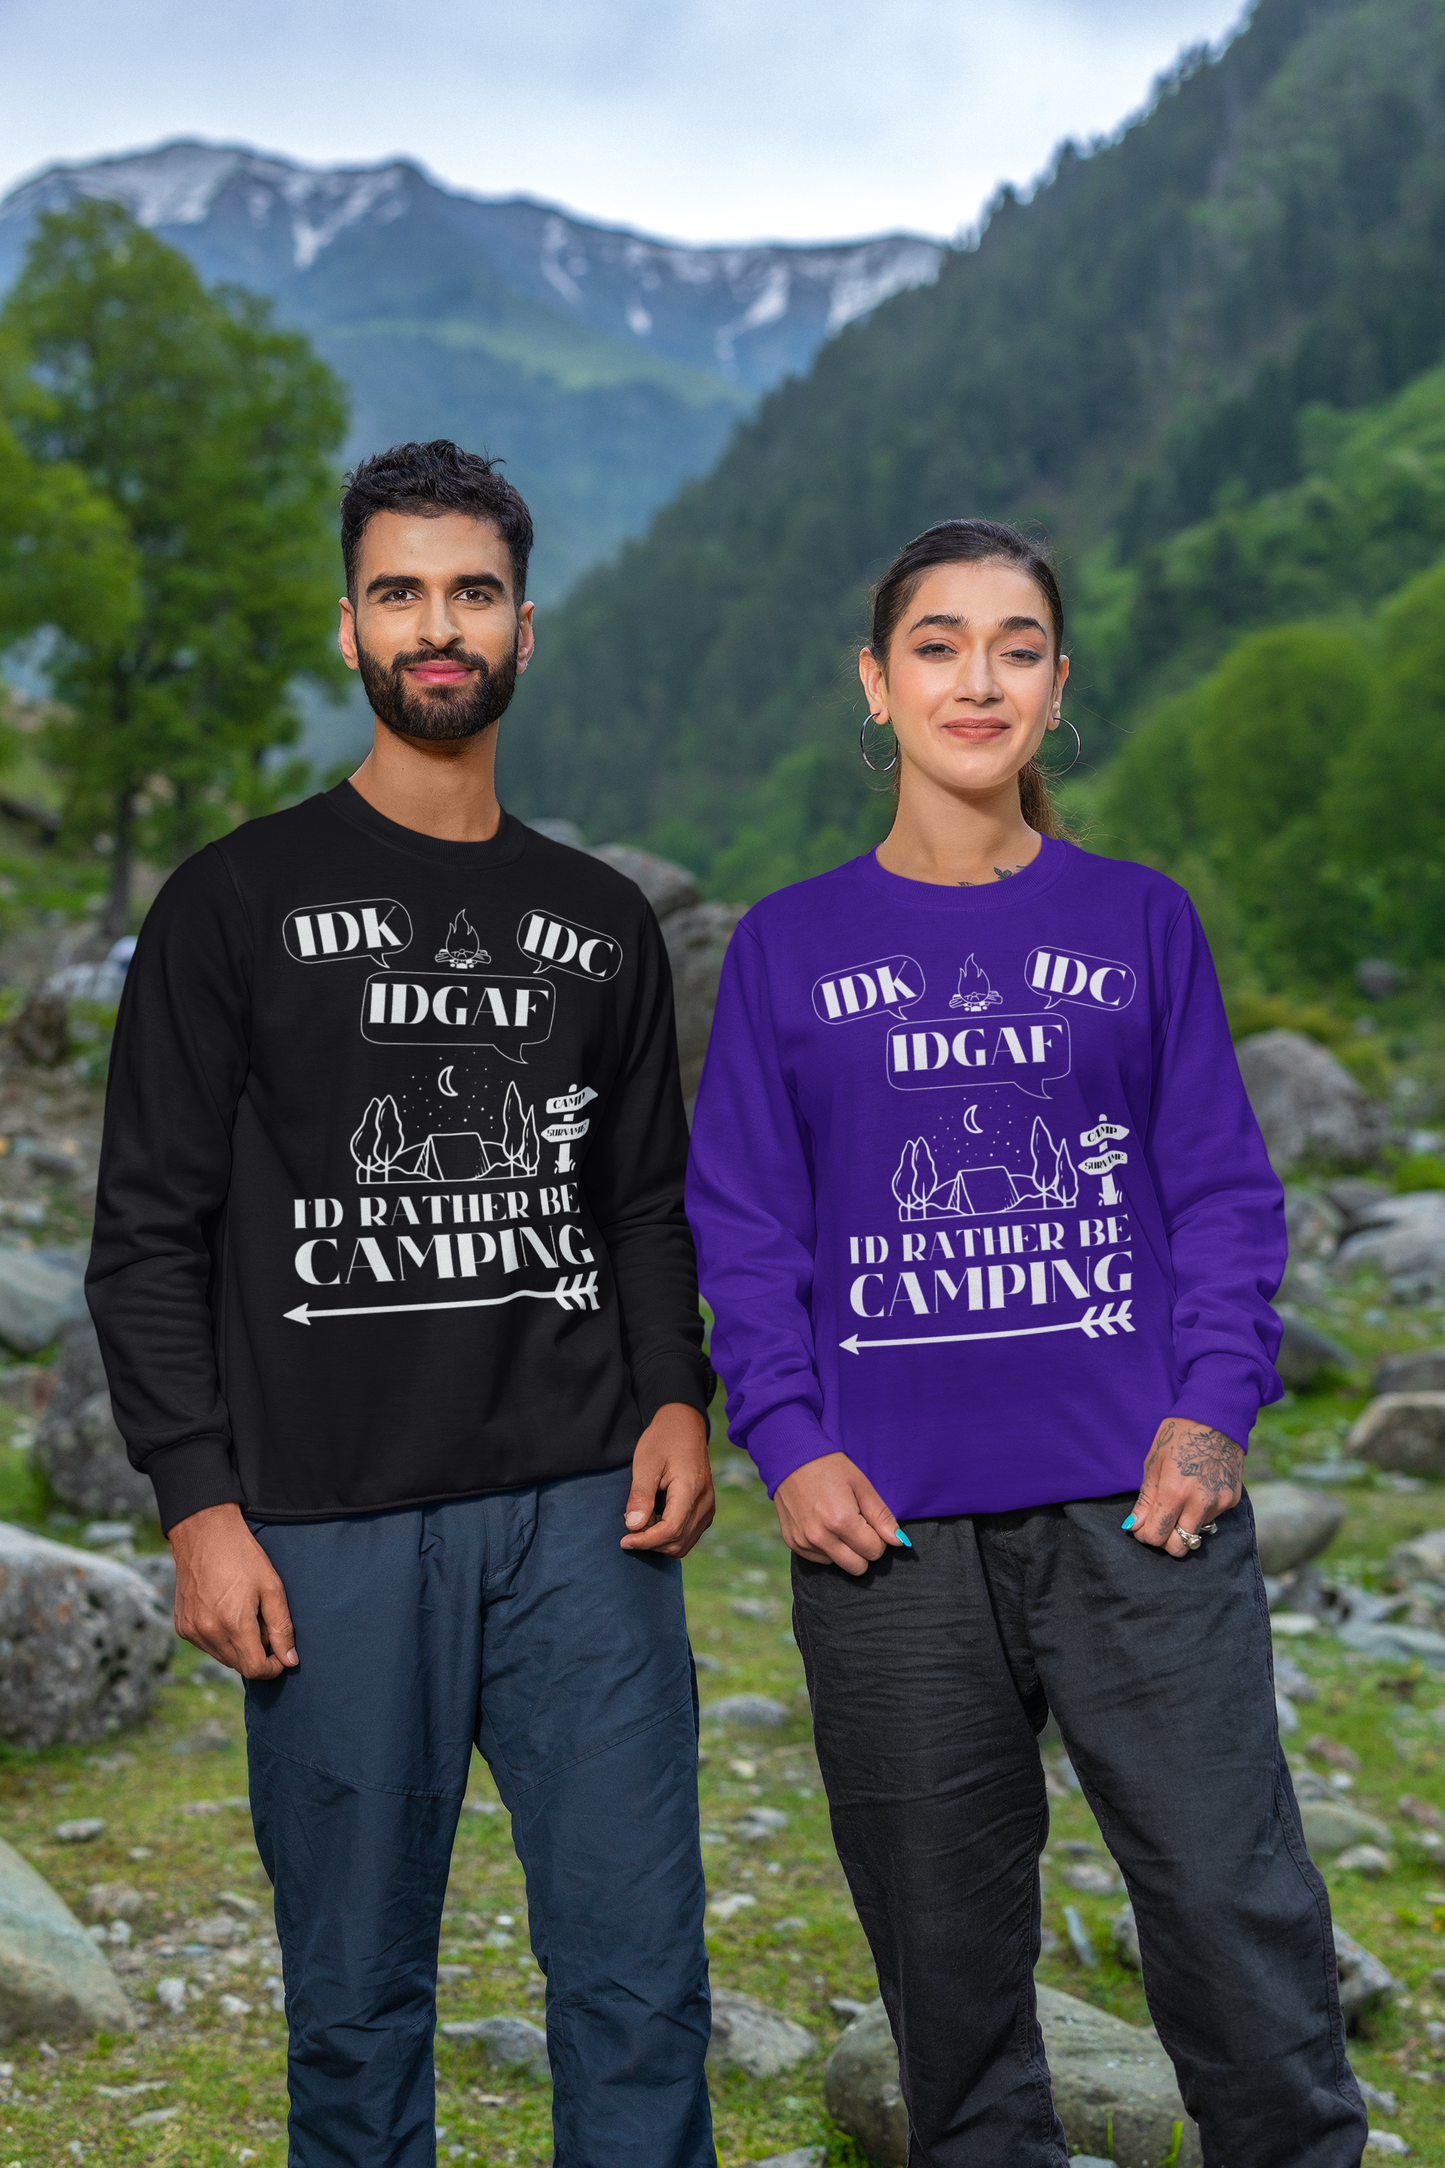 Personalized Idk, Idc, Idgaf, I'd Rather be Camping Sweatshirt, Funny Camping Sweater, Hiking Sweatshirt, Nature Lover Shirt, Outdoors Shirt